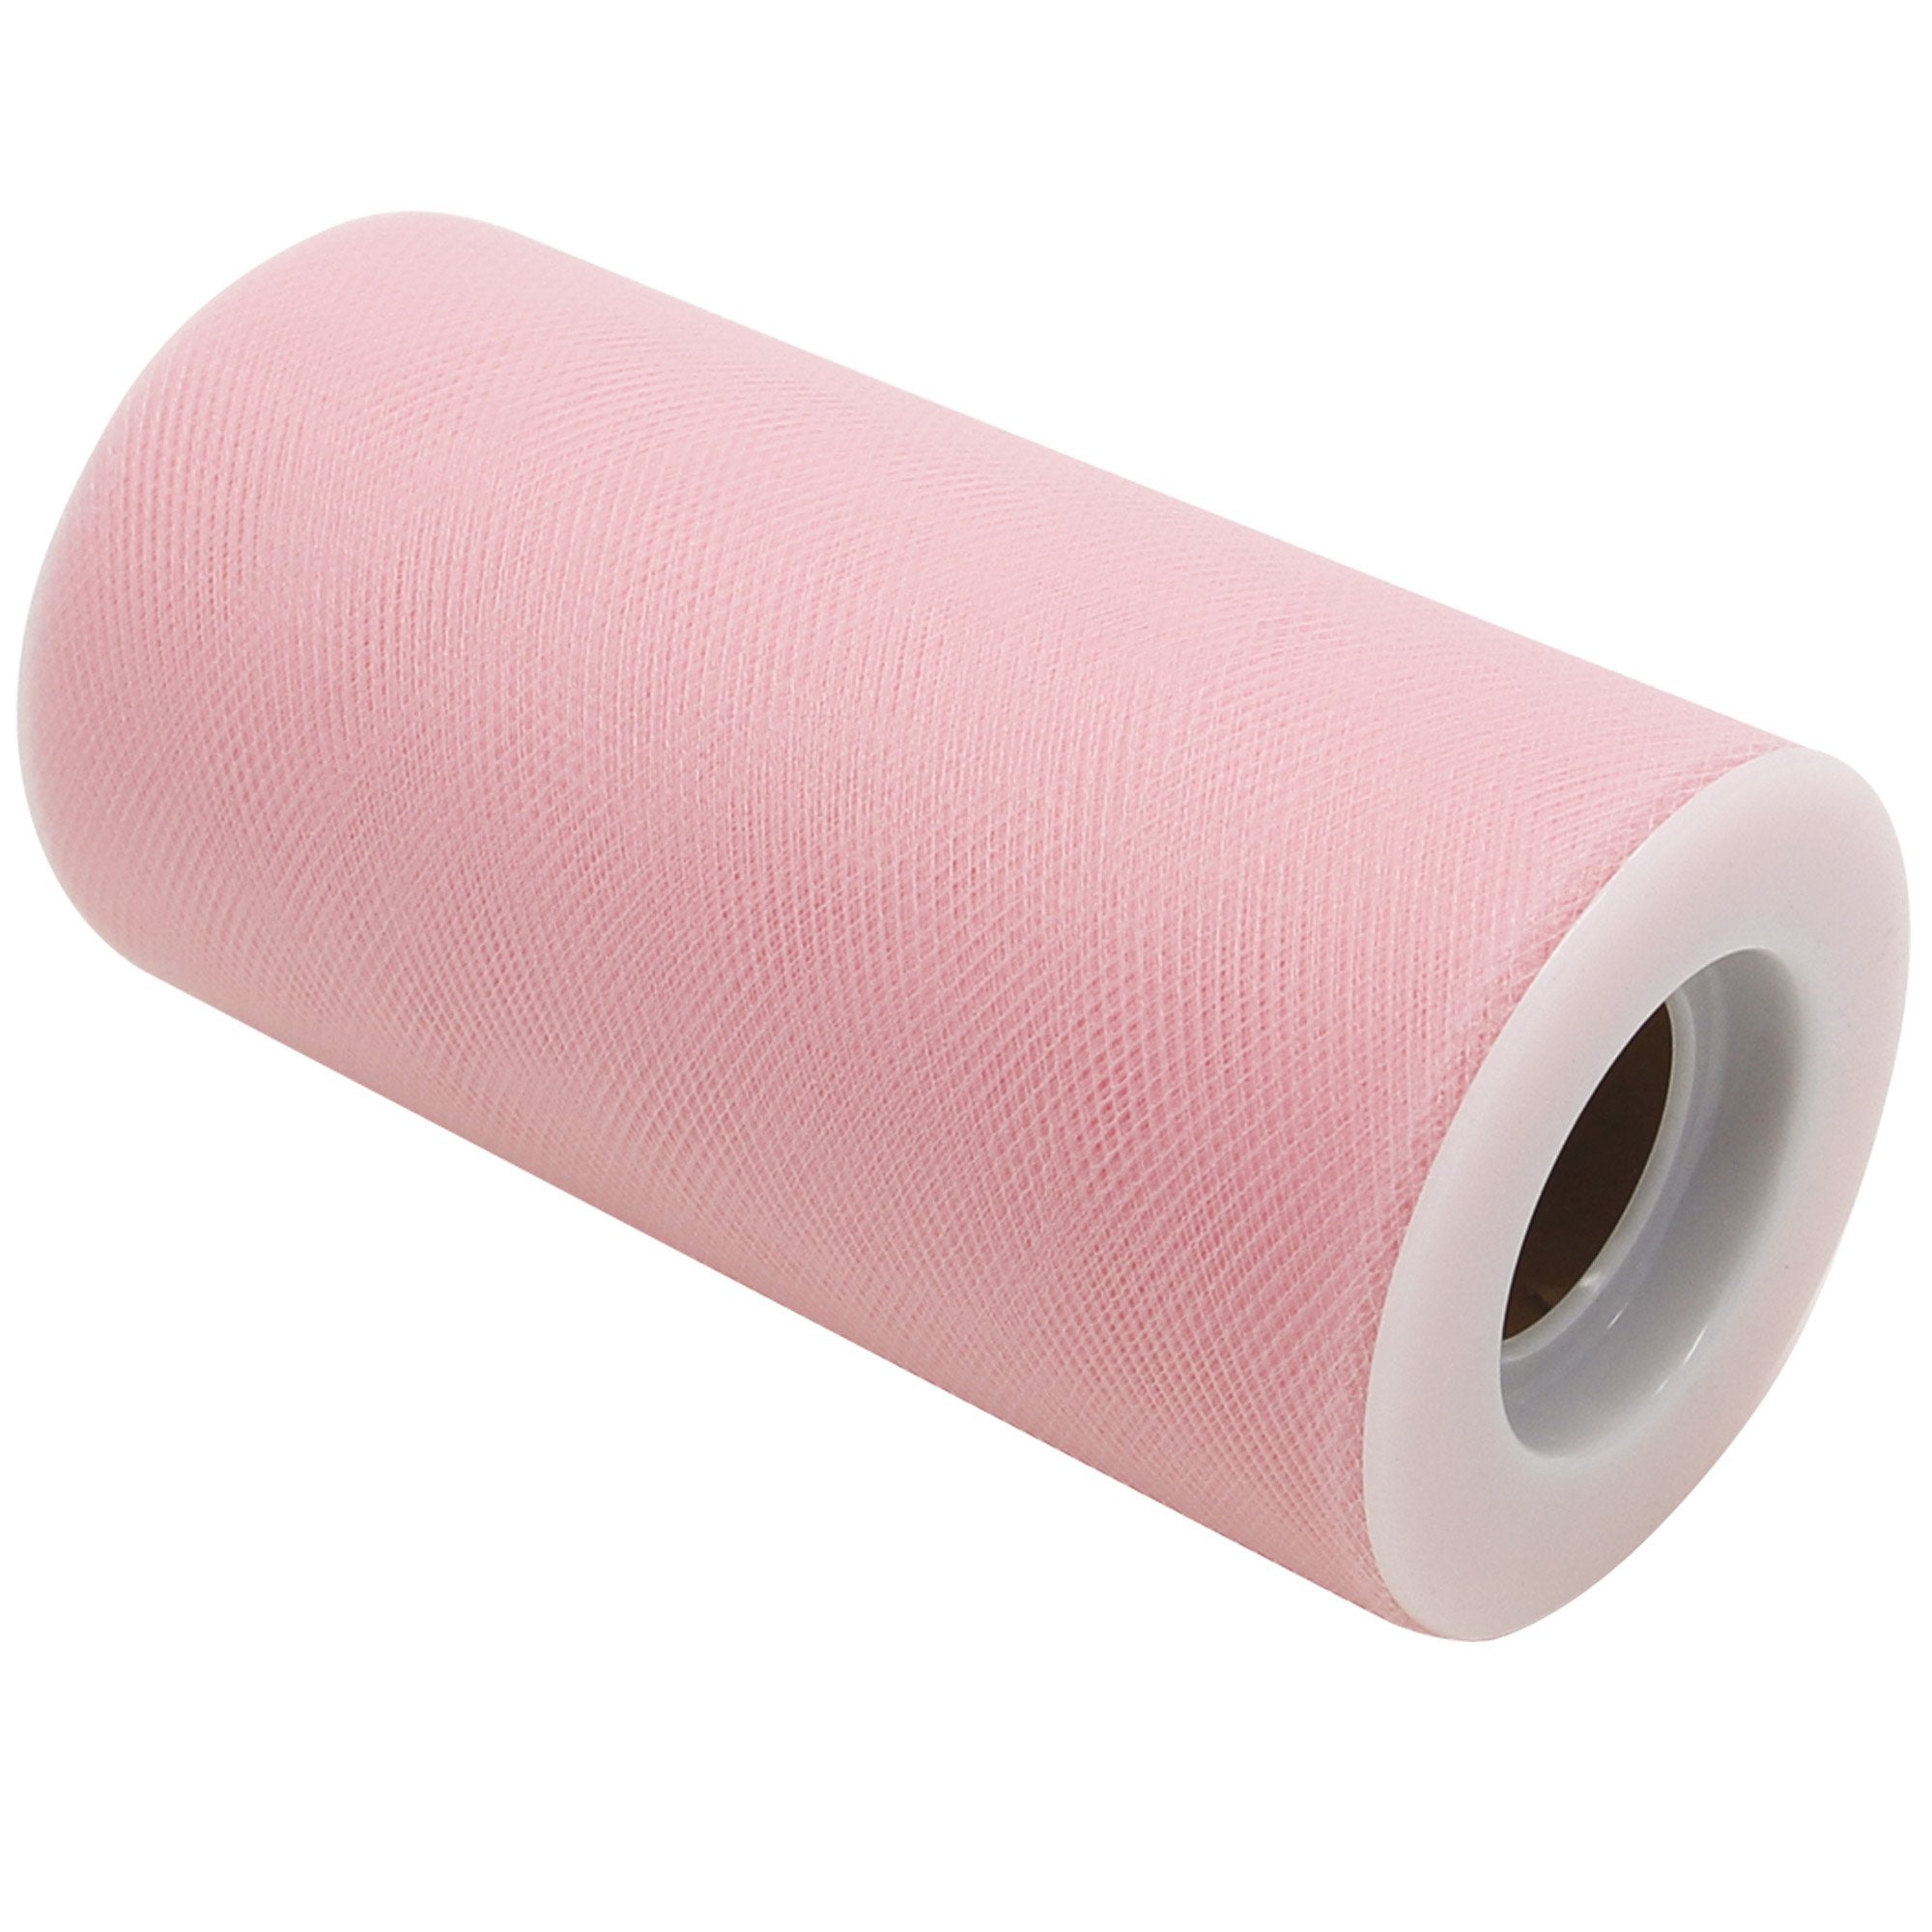 big-party-tulle-rotolo-12-5cmx25mt-rosa